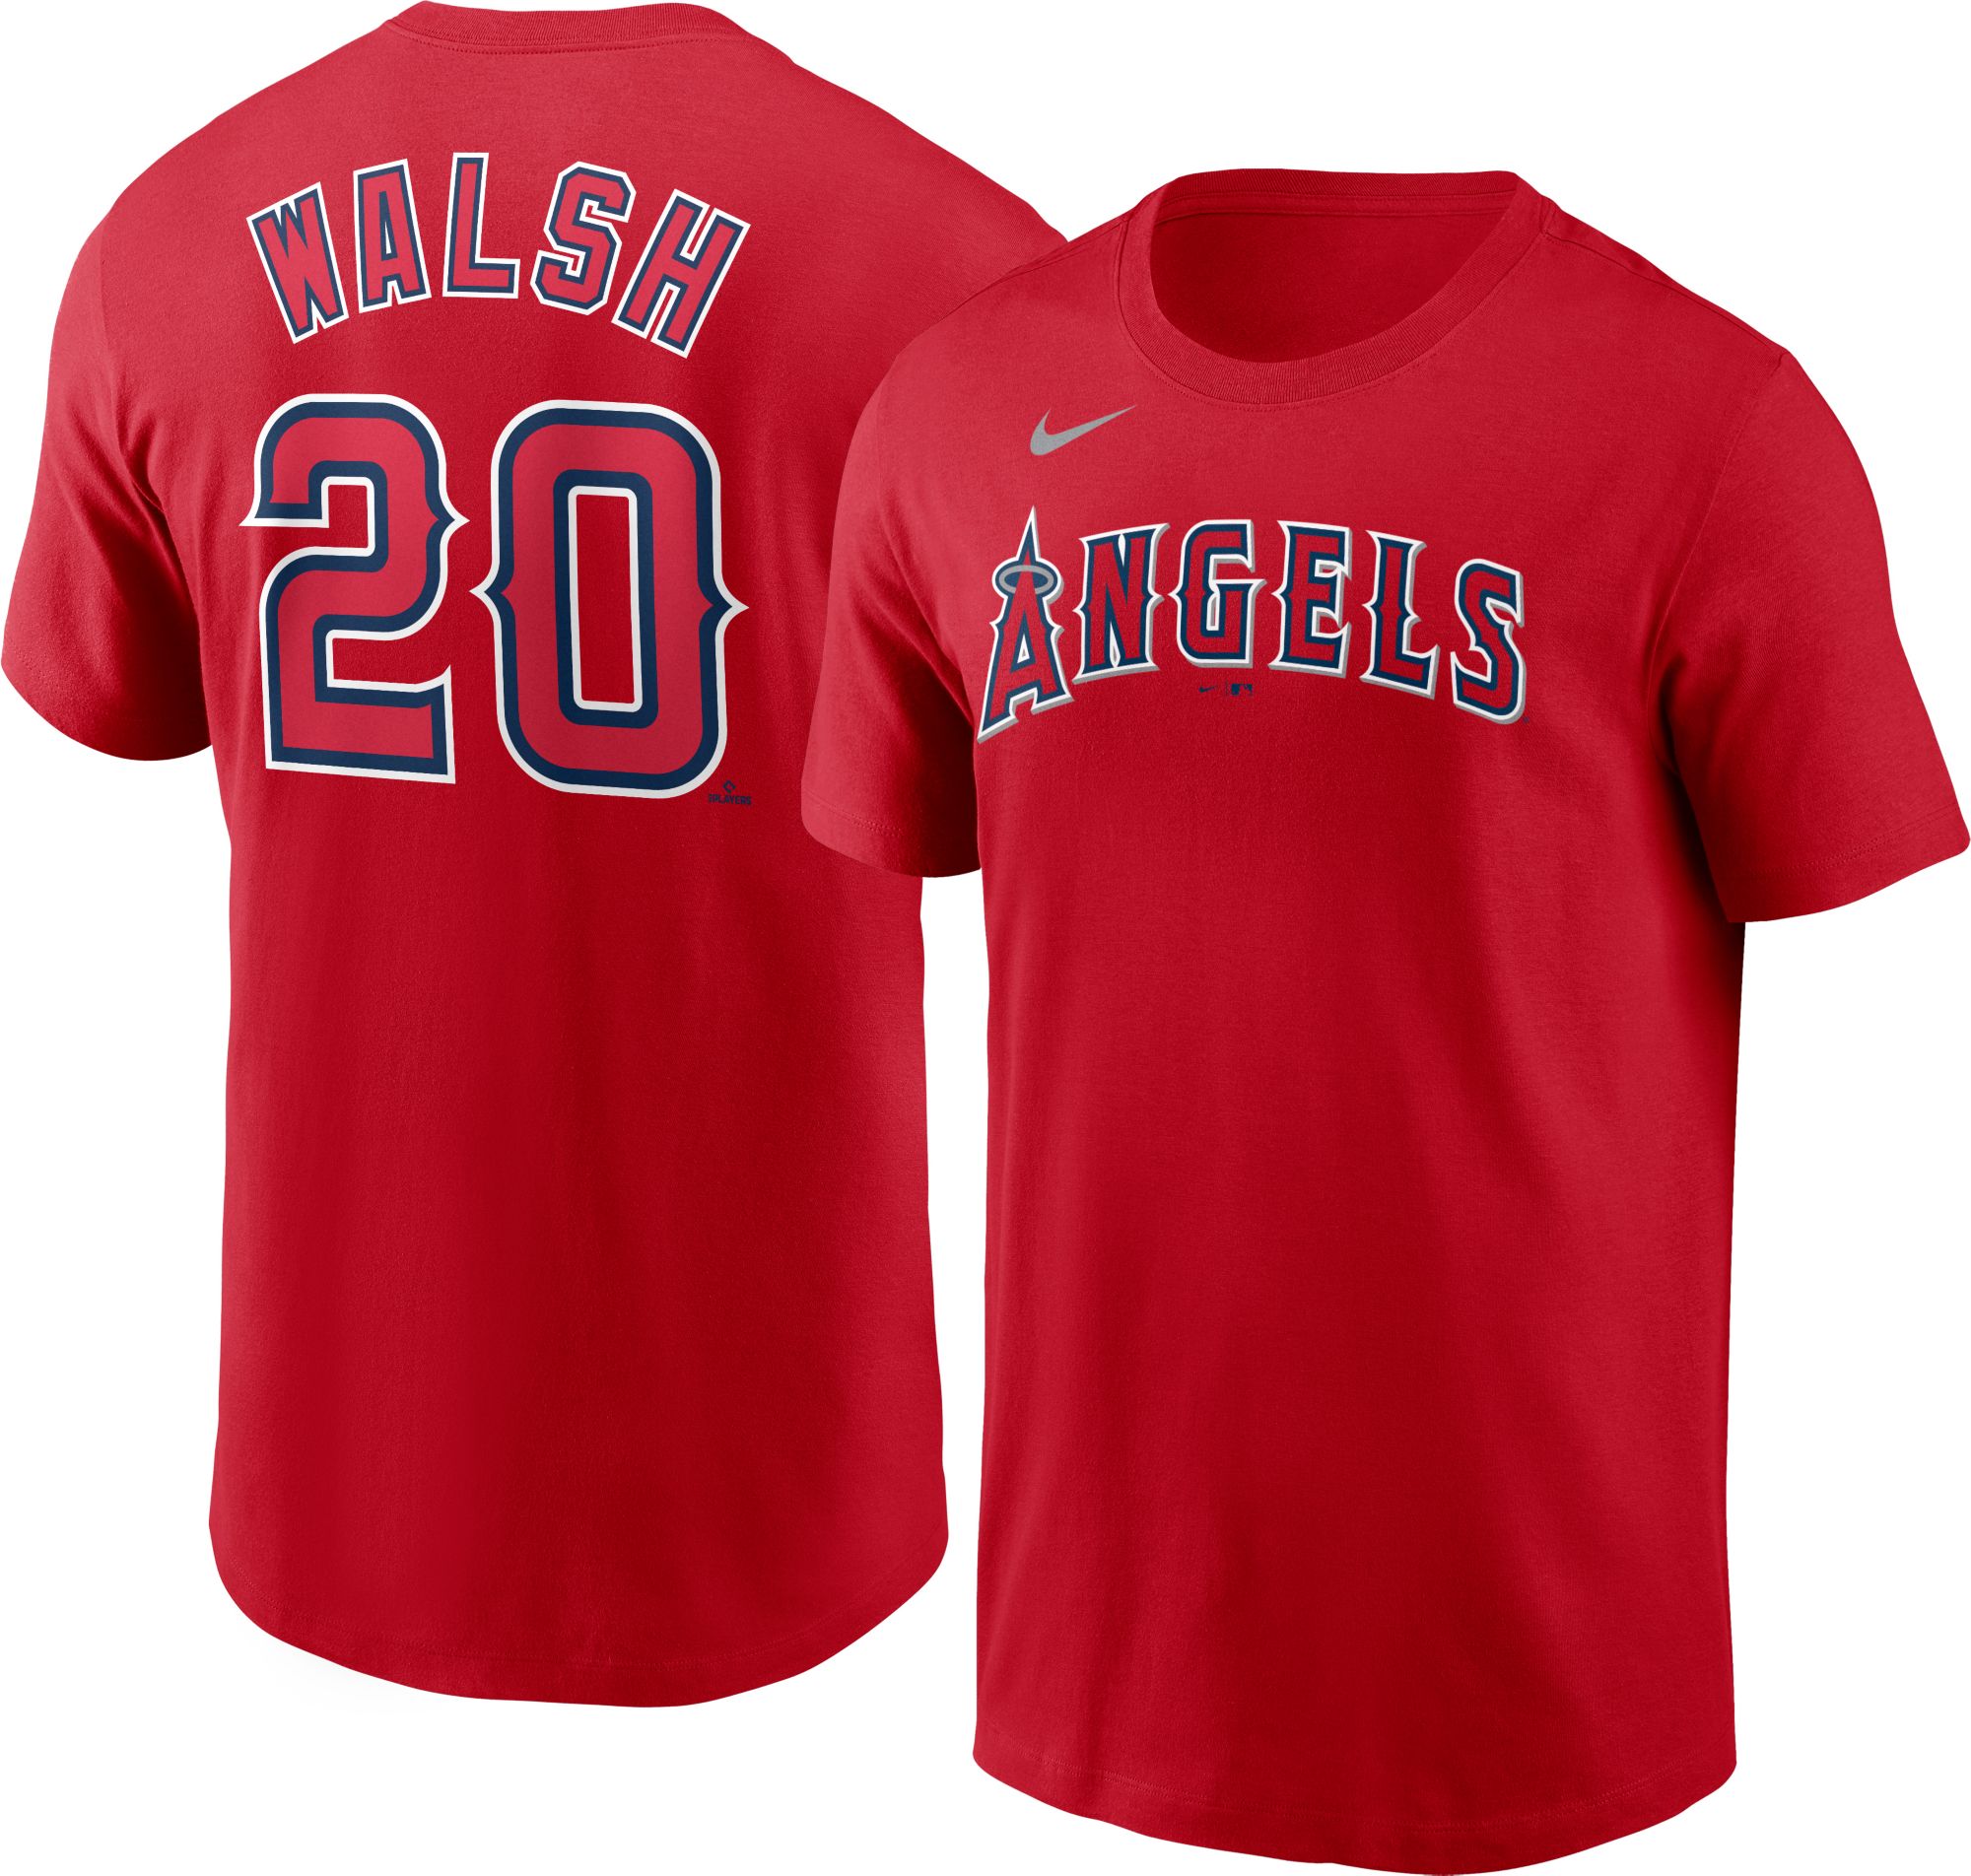 Los Angeles Angels Mike Trout 27 Angels Radio AM 830 Jersey Size Youth XL -  Body Logic